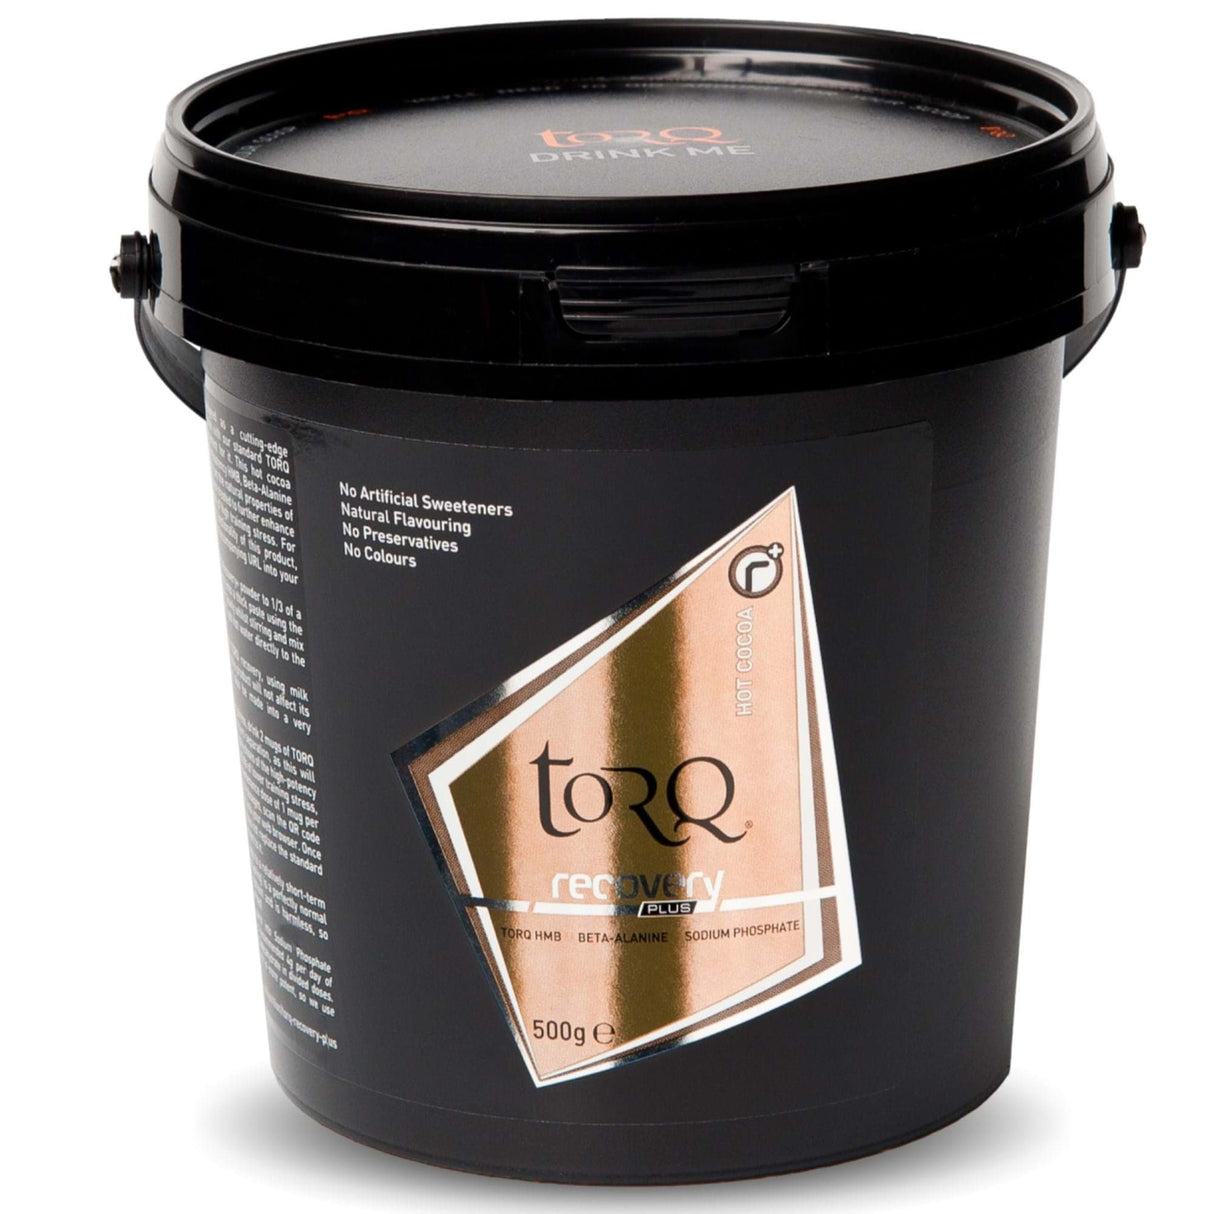 Torq Recovery Plus Hot Cocoa (1 X 500G): Hot Cocoa